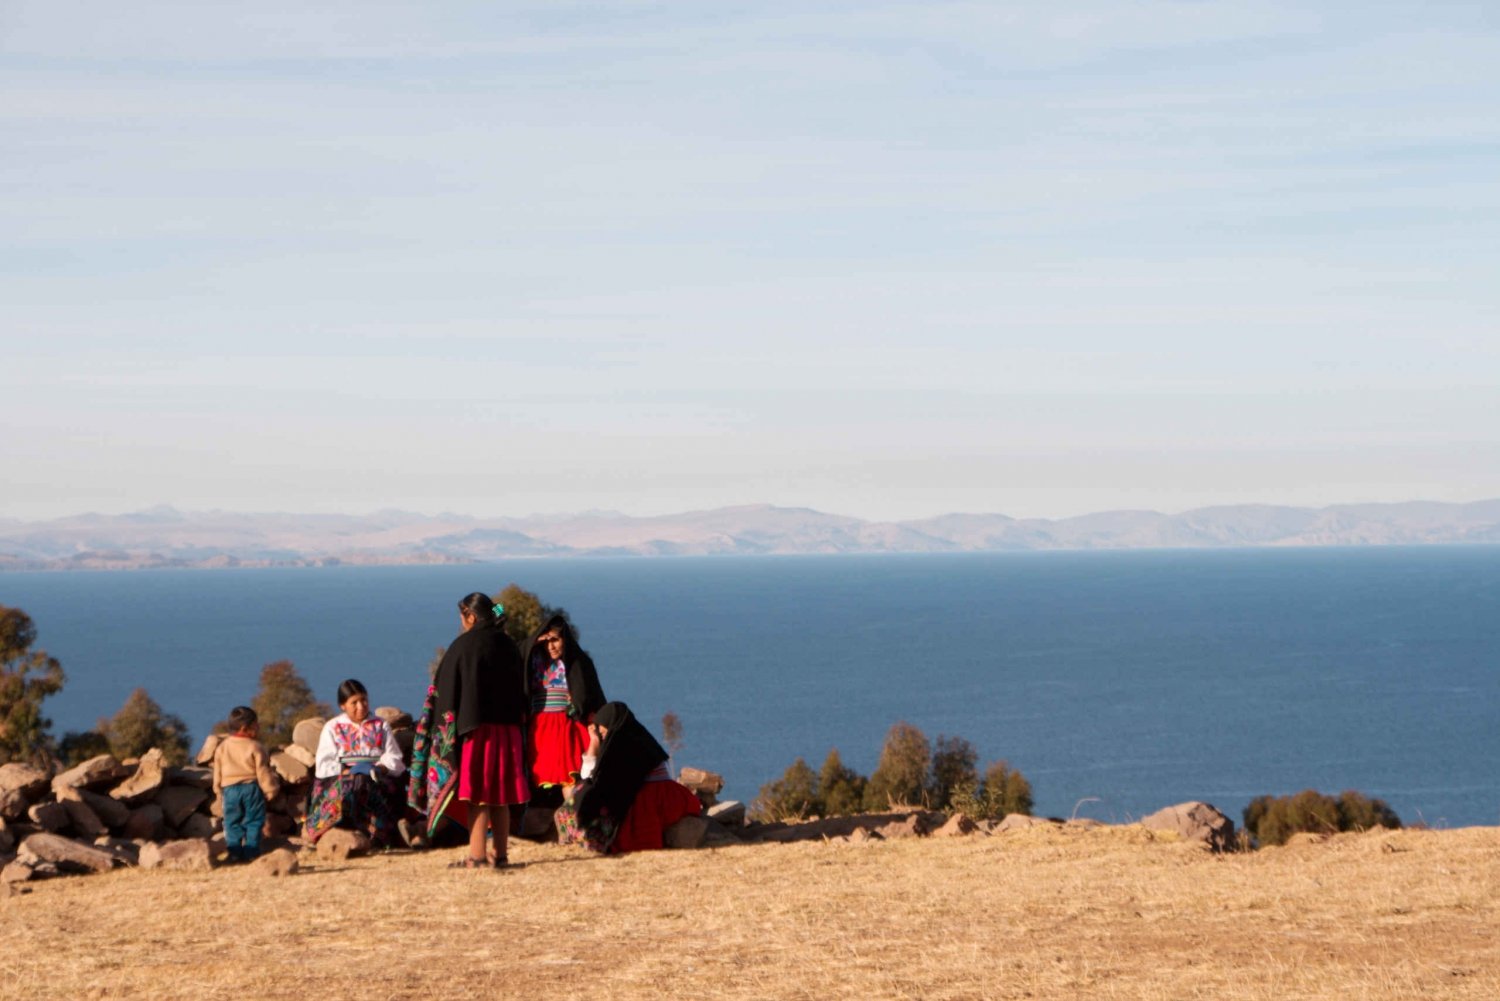 Things to do close to Puno